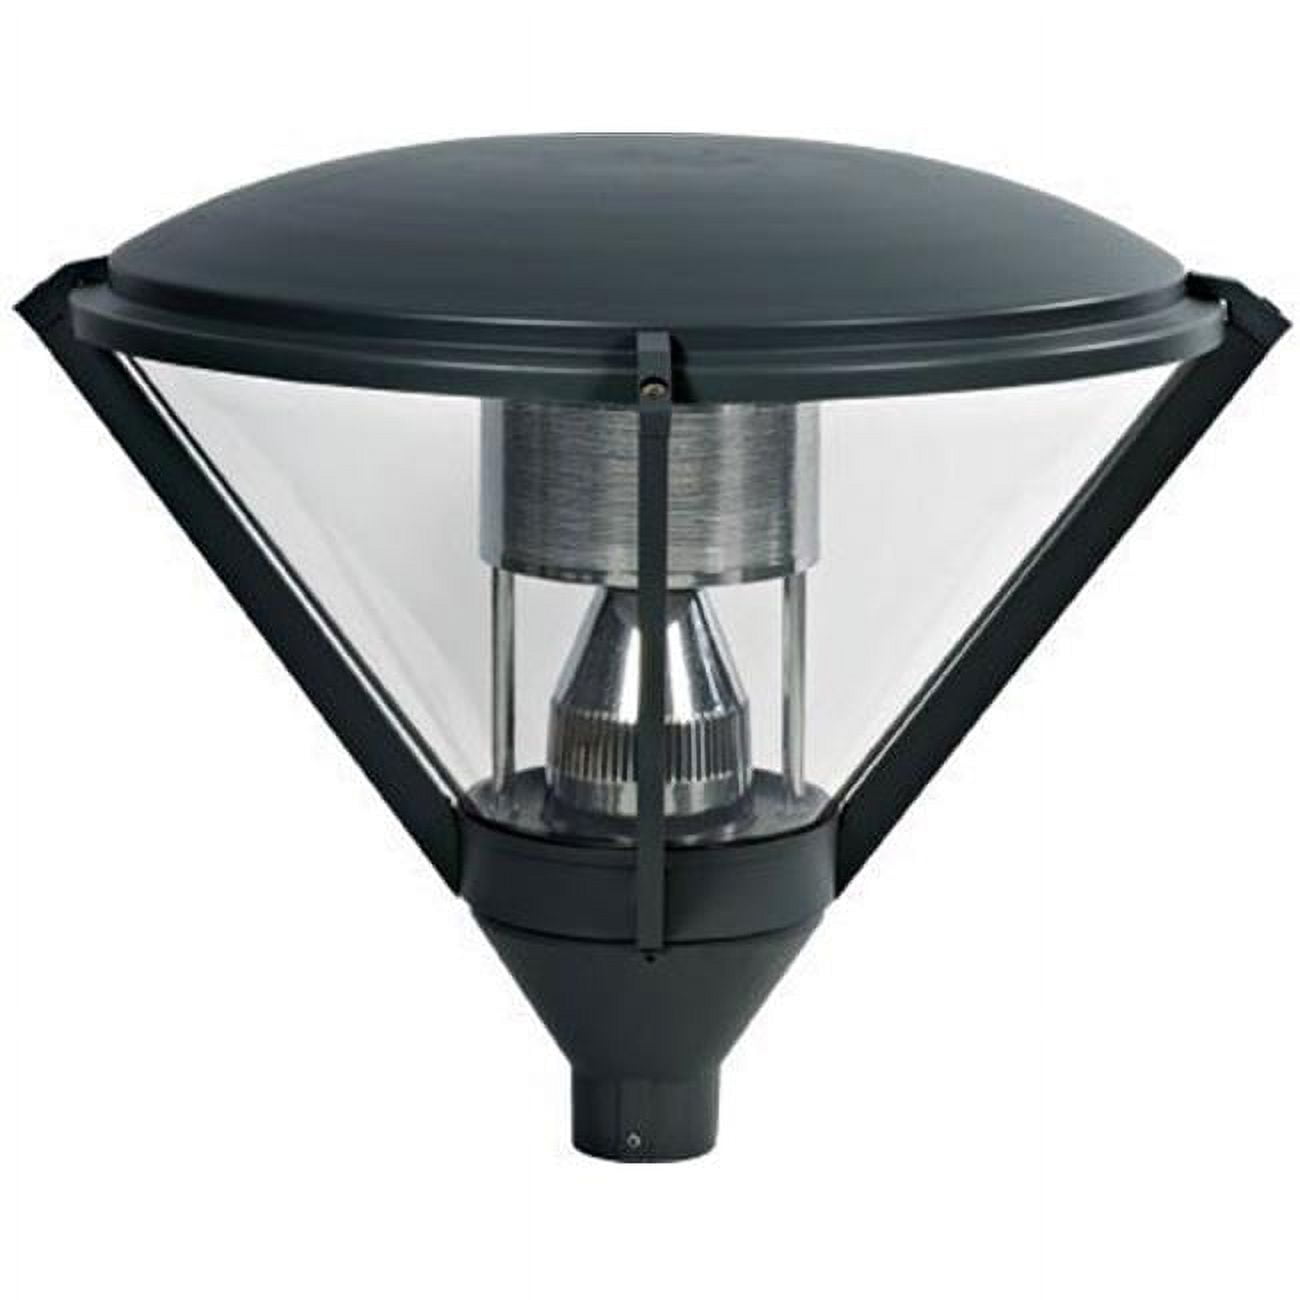 Picture of Dabmar Lighting GM500-LED30 Post Top Light Fixture - 60W 120V